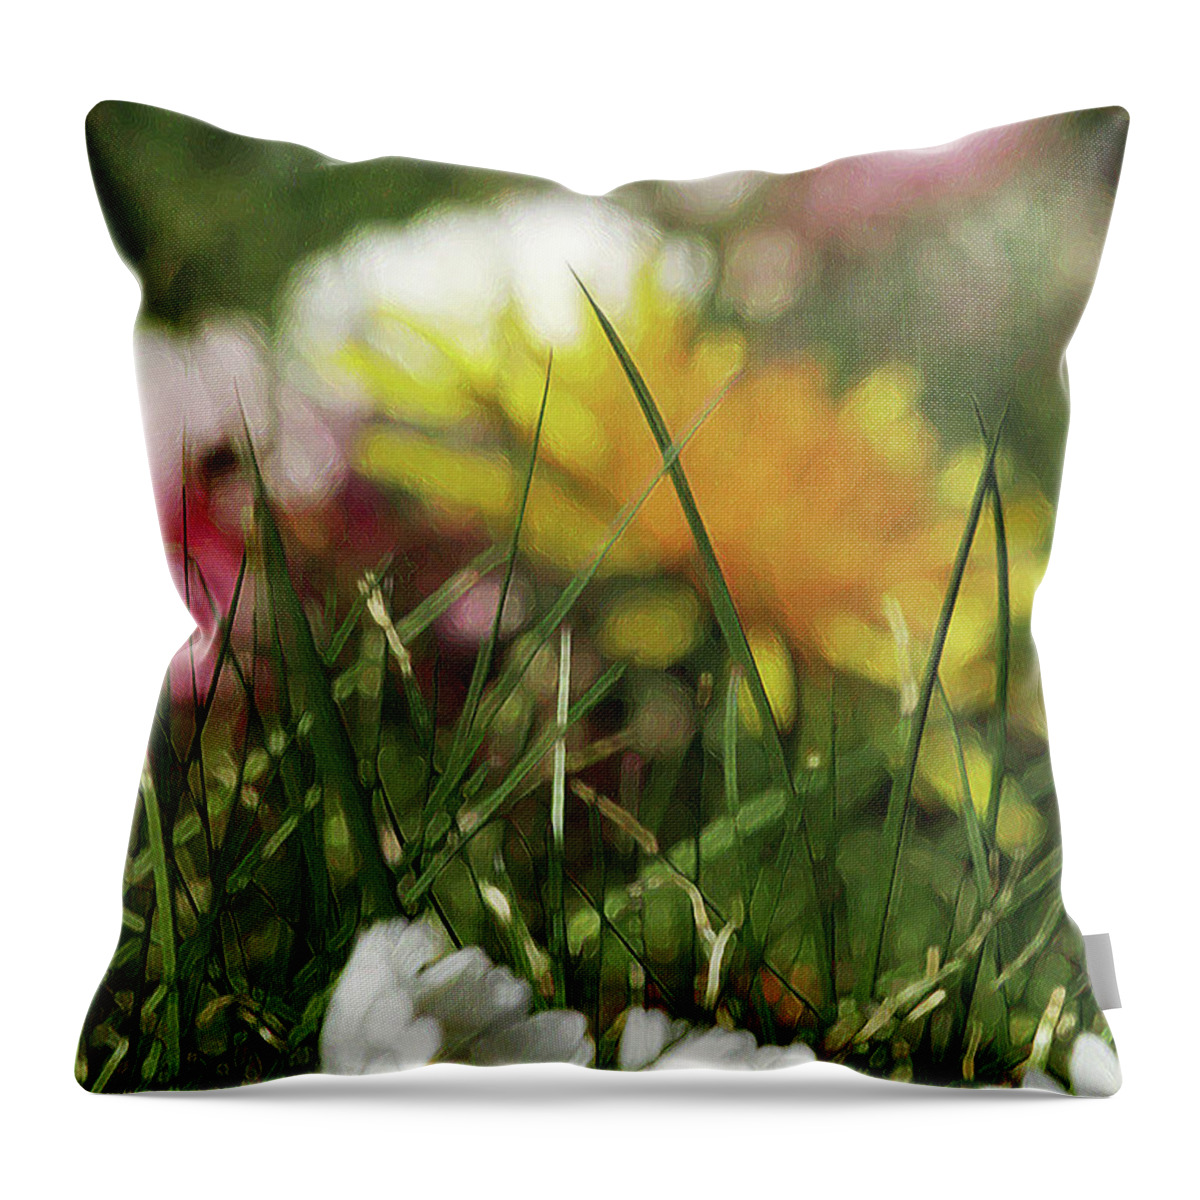 Grass Throw Pillow featuring the photograph Dreamy Spring by Kim Tran